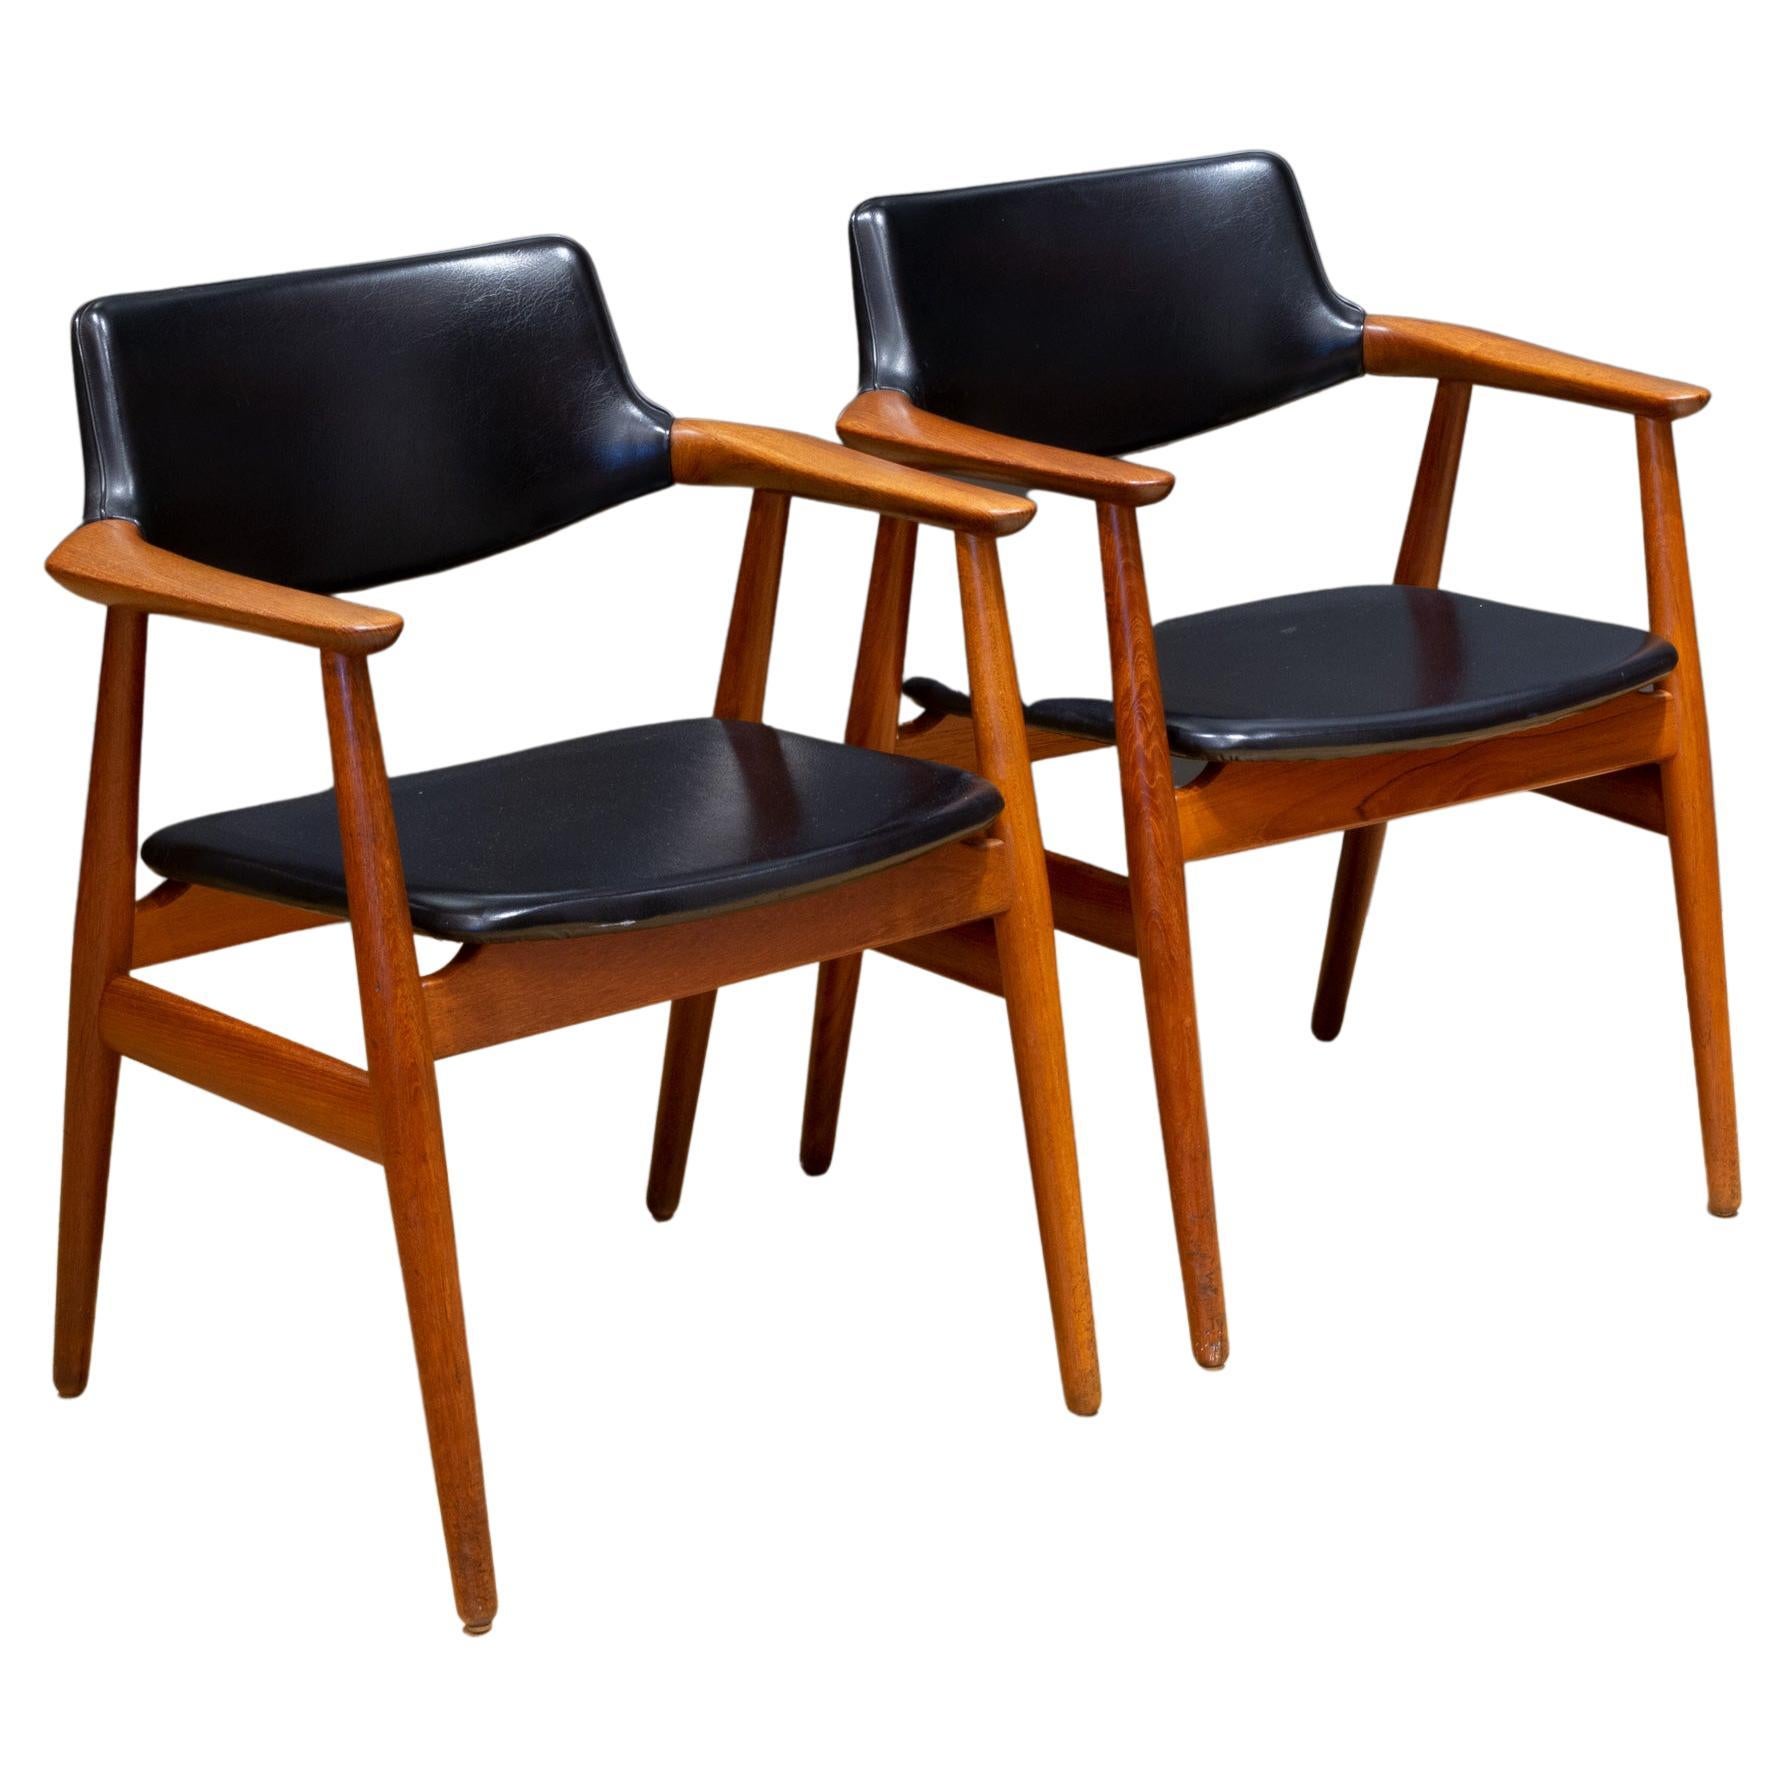 Midcentury Sculpted Teak Armchairs, circa 1960-May sell separately  For Sale